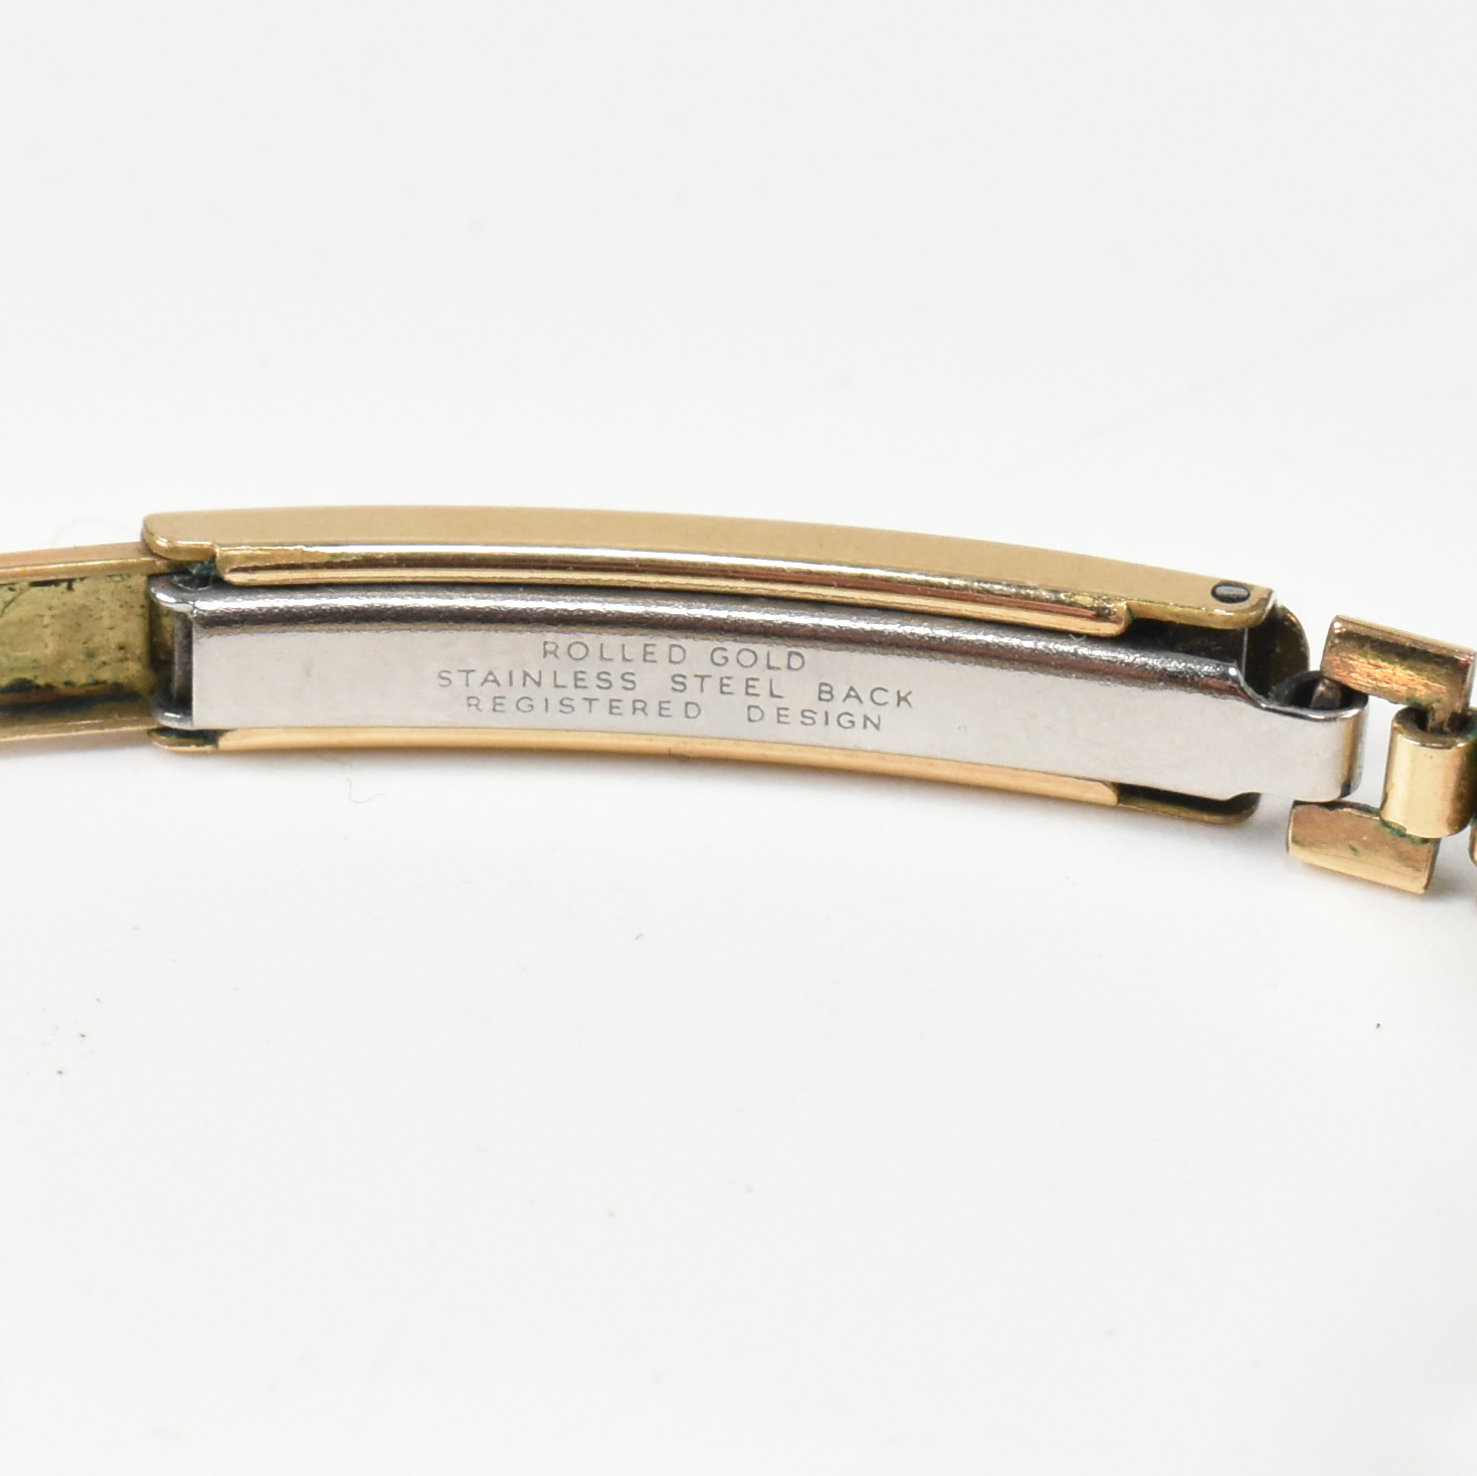 HALLMARKED 9CT GOLD AUDAX LADIES DRESS WATCH WITH ROLLED GOLD BRACELET - Image 5 of 7